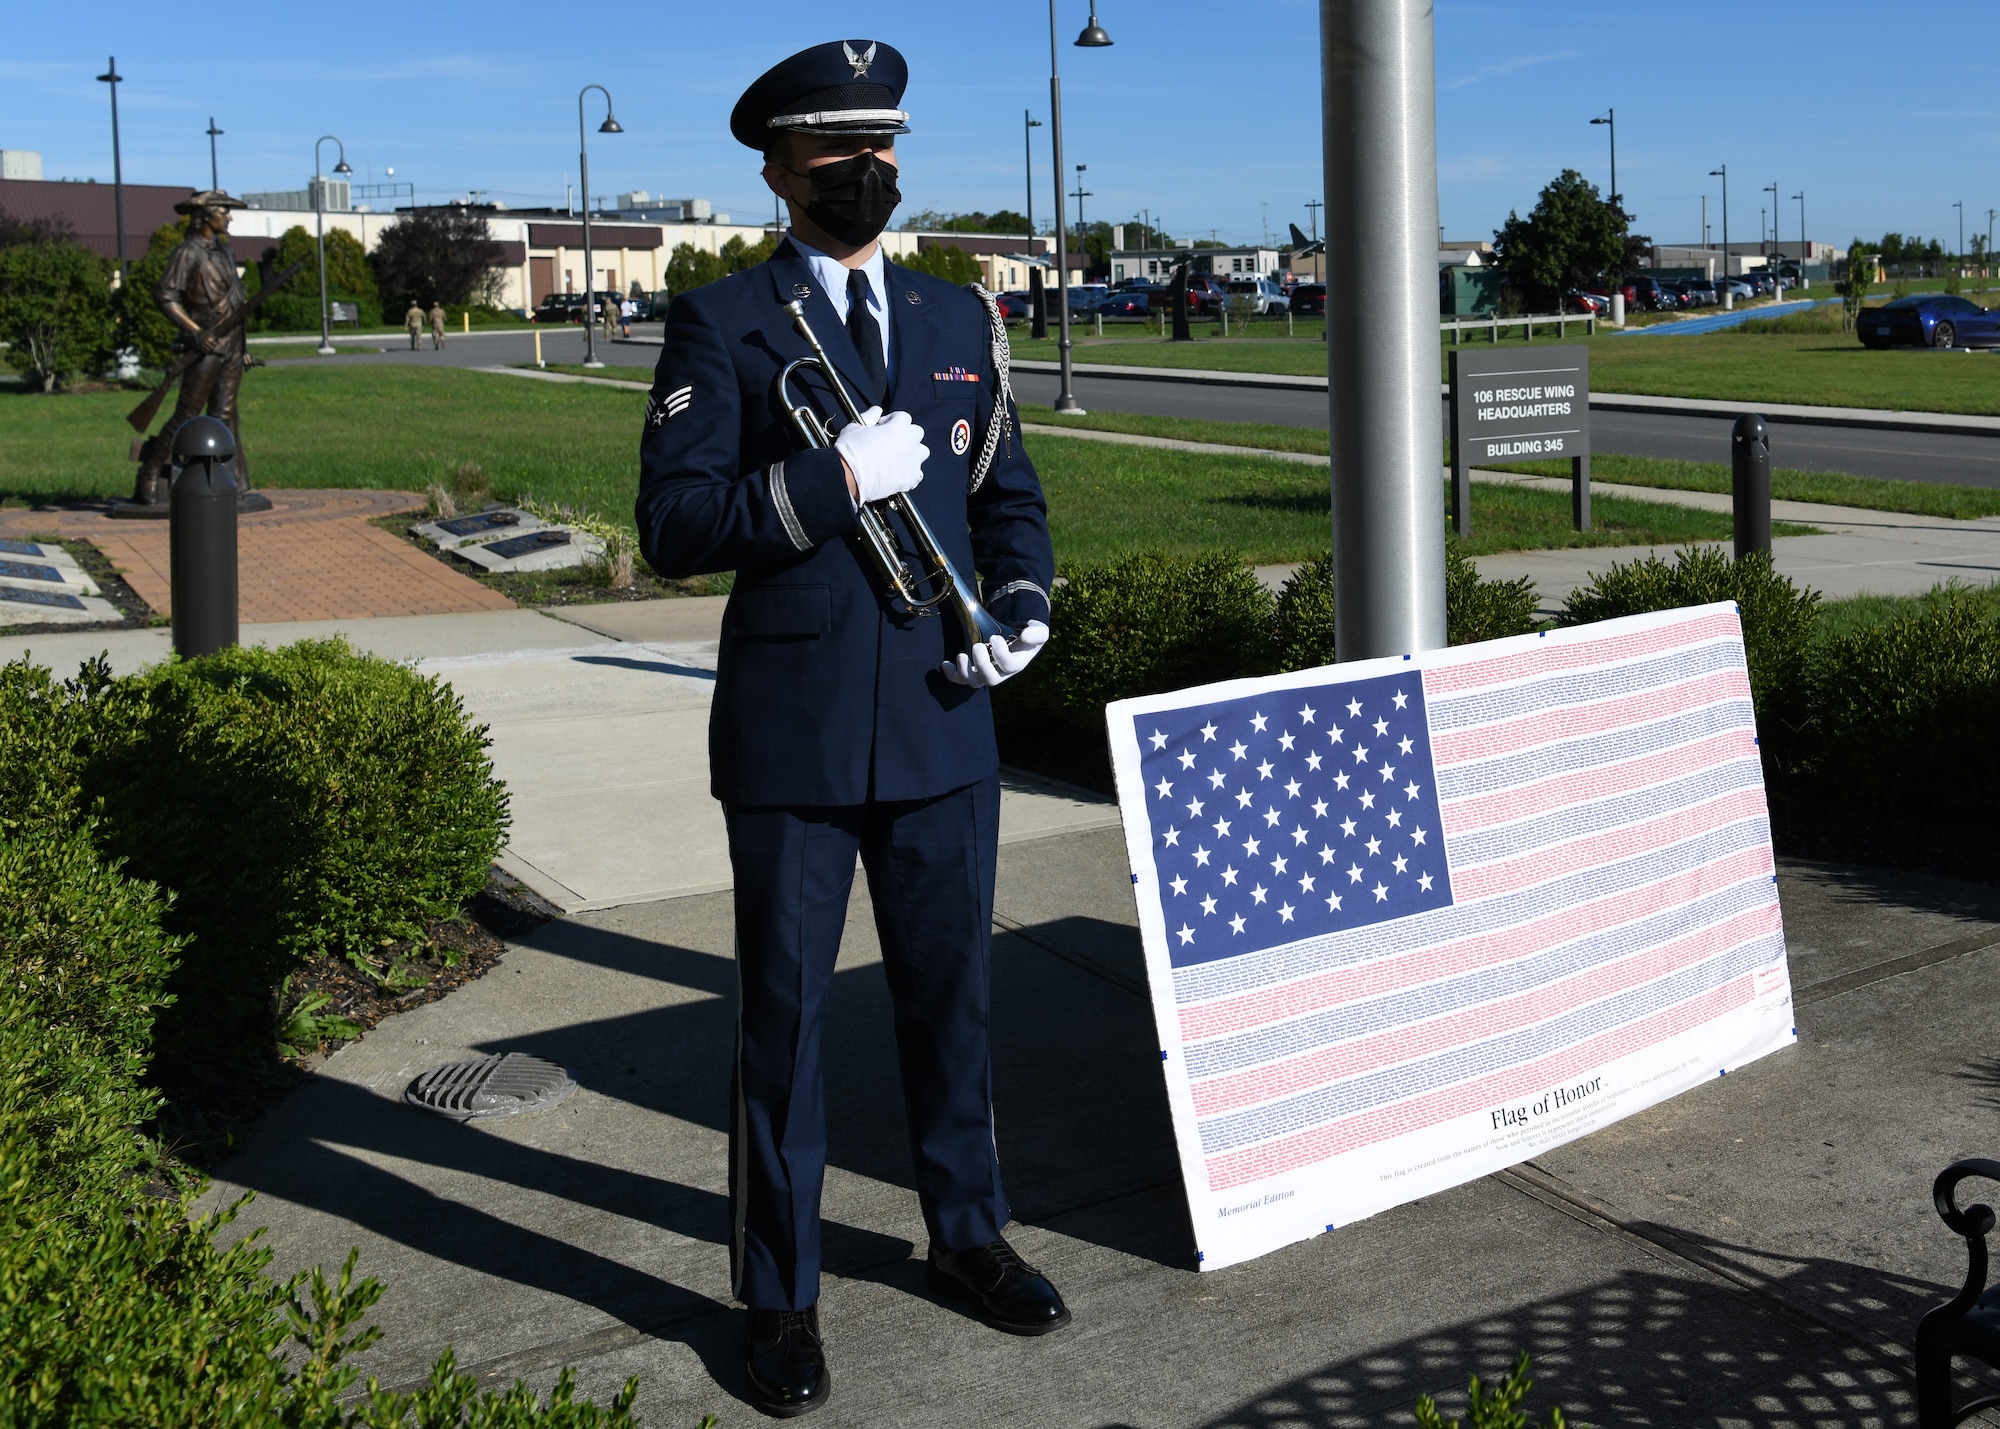 Senior Airman Allen Bethancourt, a 106th personnelist and Honor Guard member, poses with the Flag of Honor, September 11, 2021, at Gabreski Air National Guard Base in Westhampton Beach, N.Y. The Flag of Honor, comprised of the names of those who died in the terror attacks on 9/11 and in the 1993 World Trade Center bombing, was on display during the 20th anniversary of 9/11. (U.S. Air National Guard photo by Senior Airman Kevin J. Donaldson)